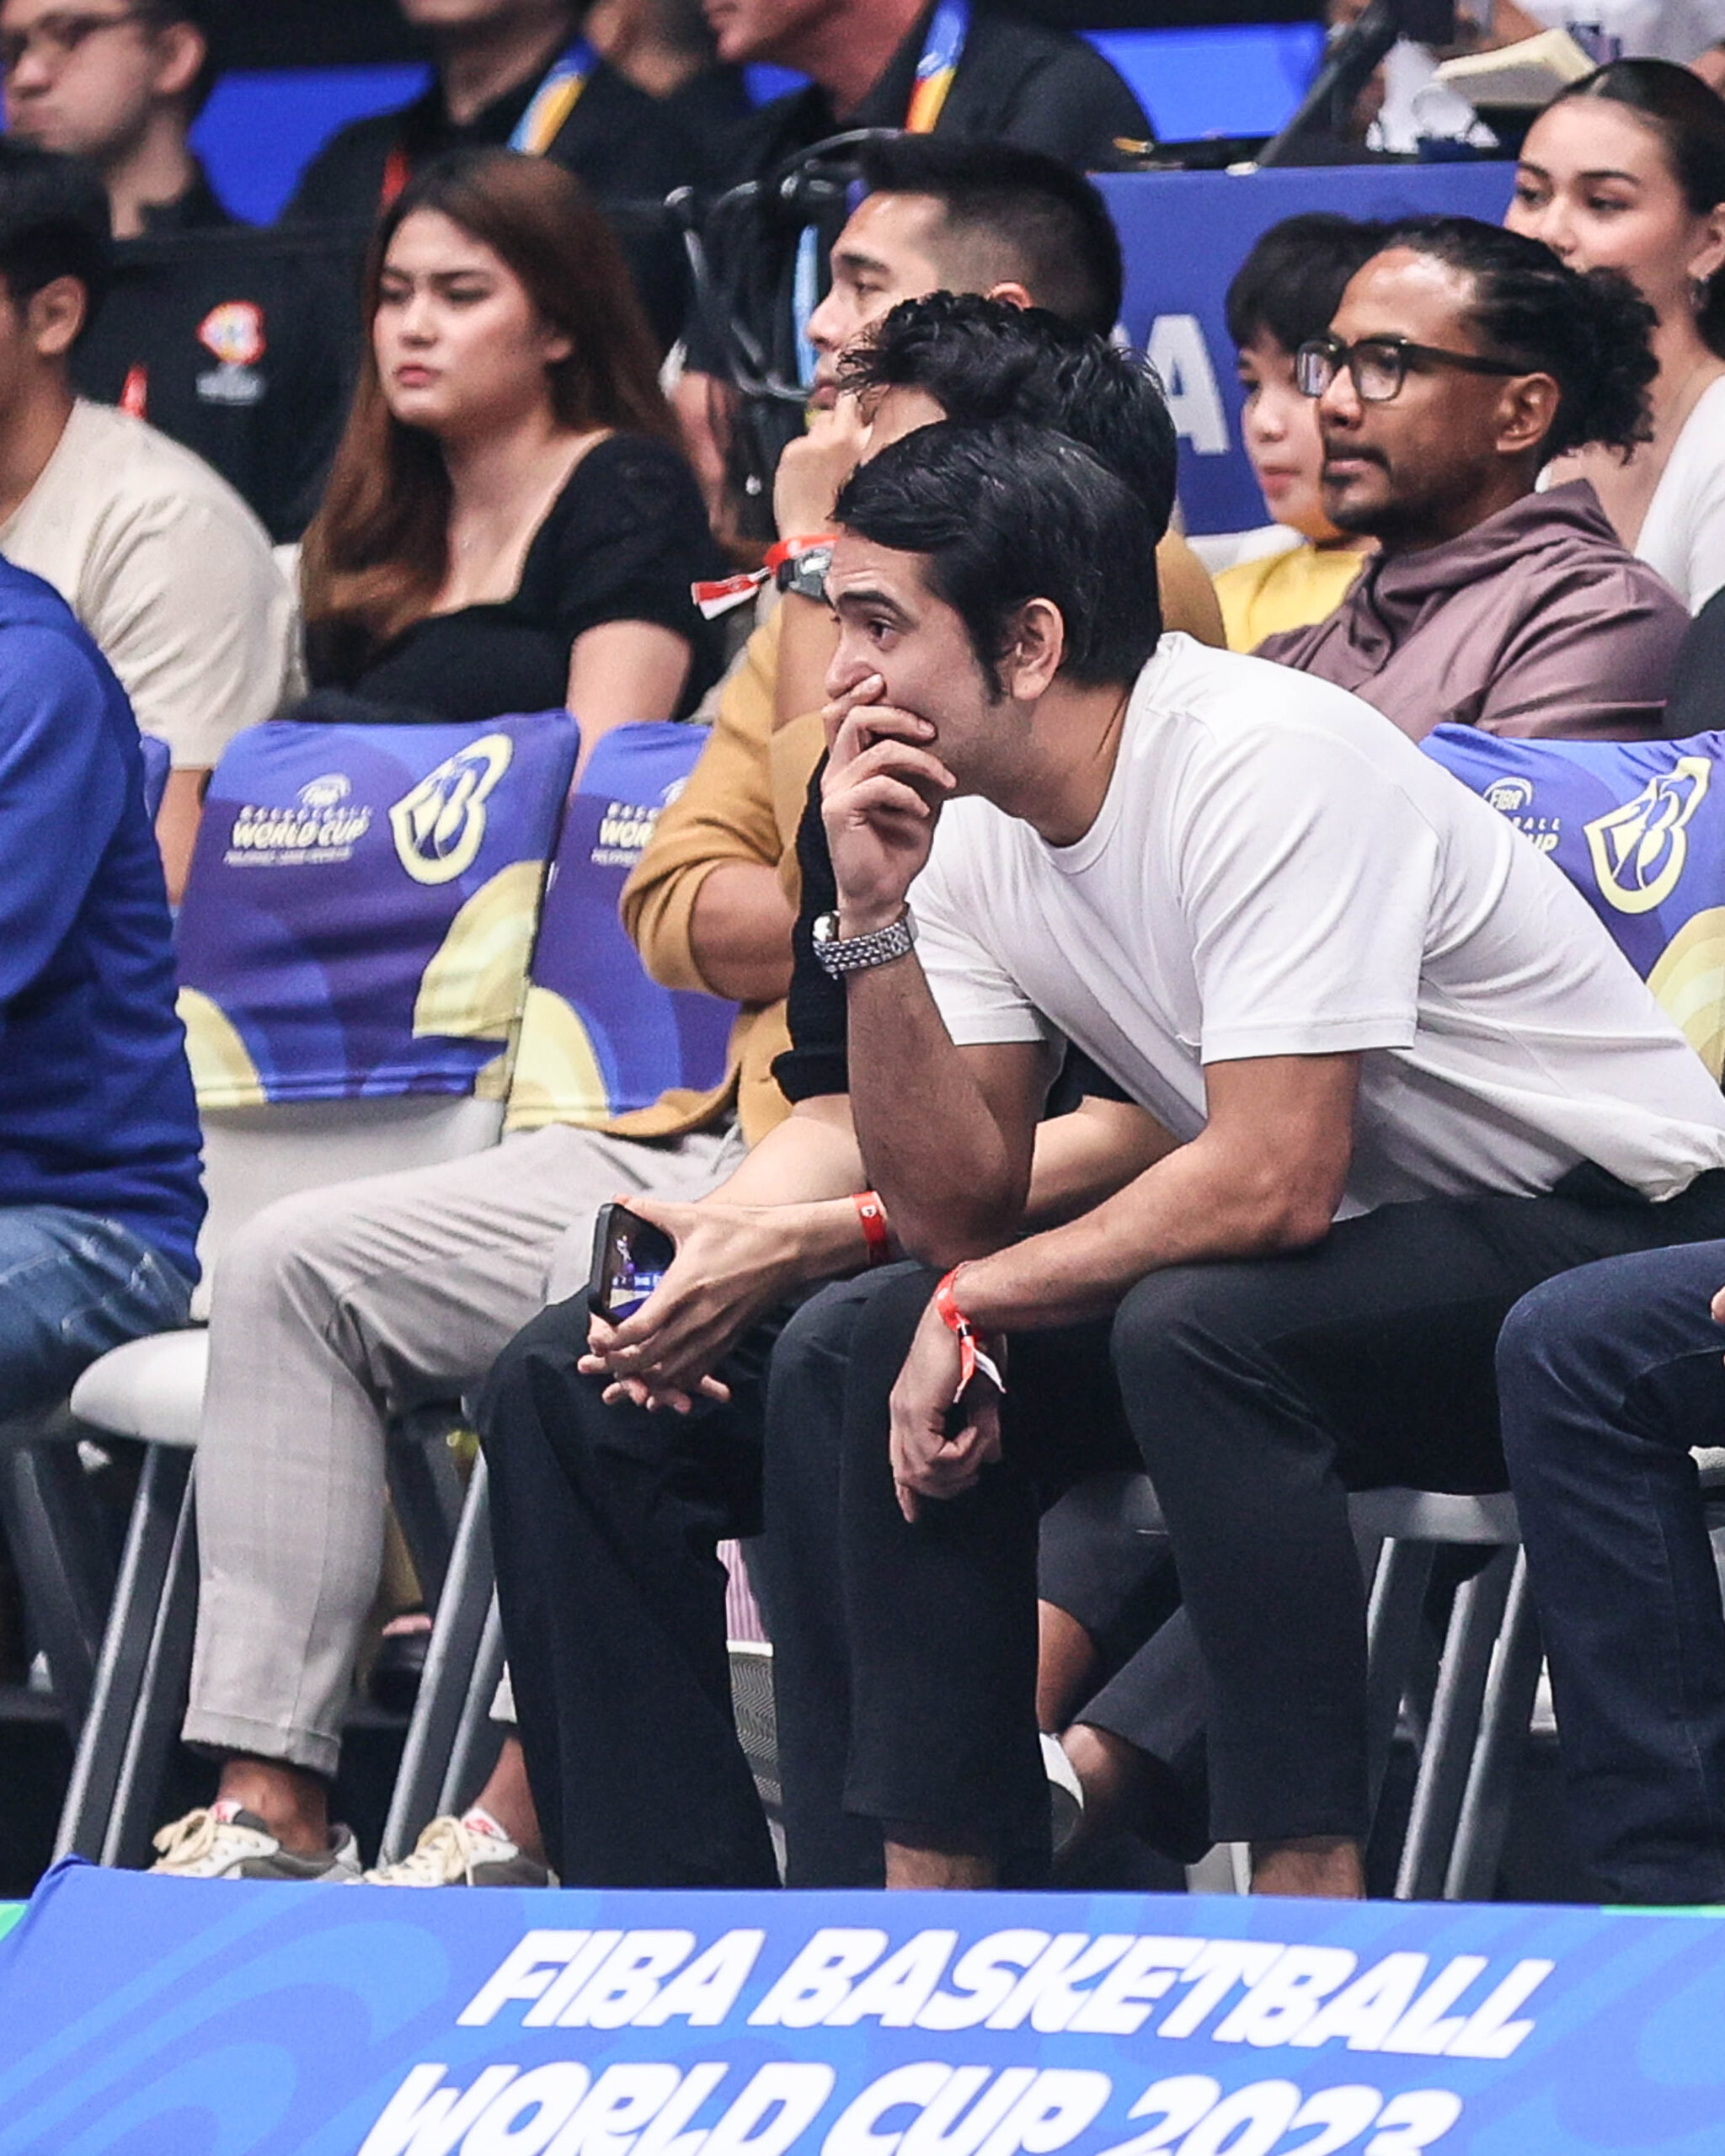 Stars who watched Gilas Pilipinas at the 2023 World Cup: Gerald Anderson and Young JV